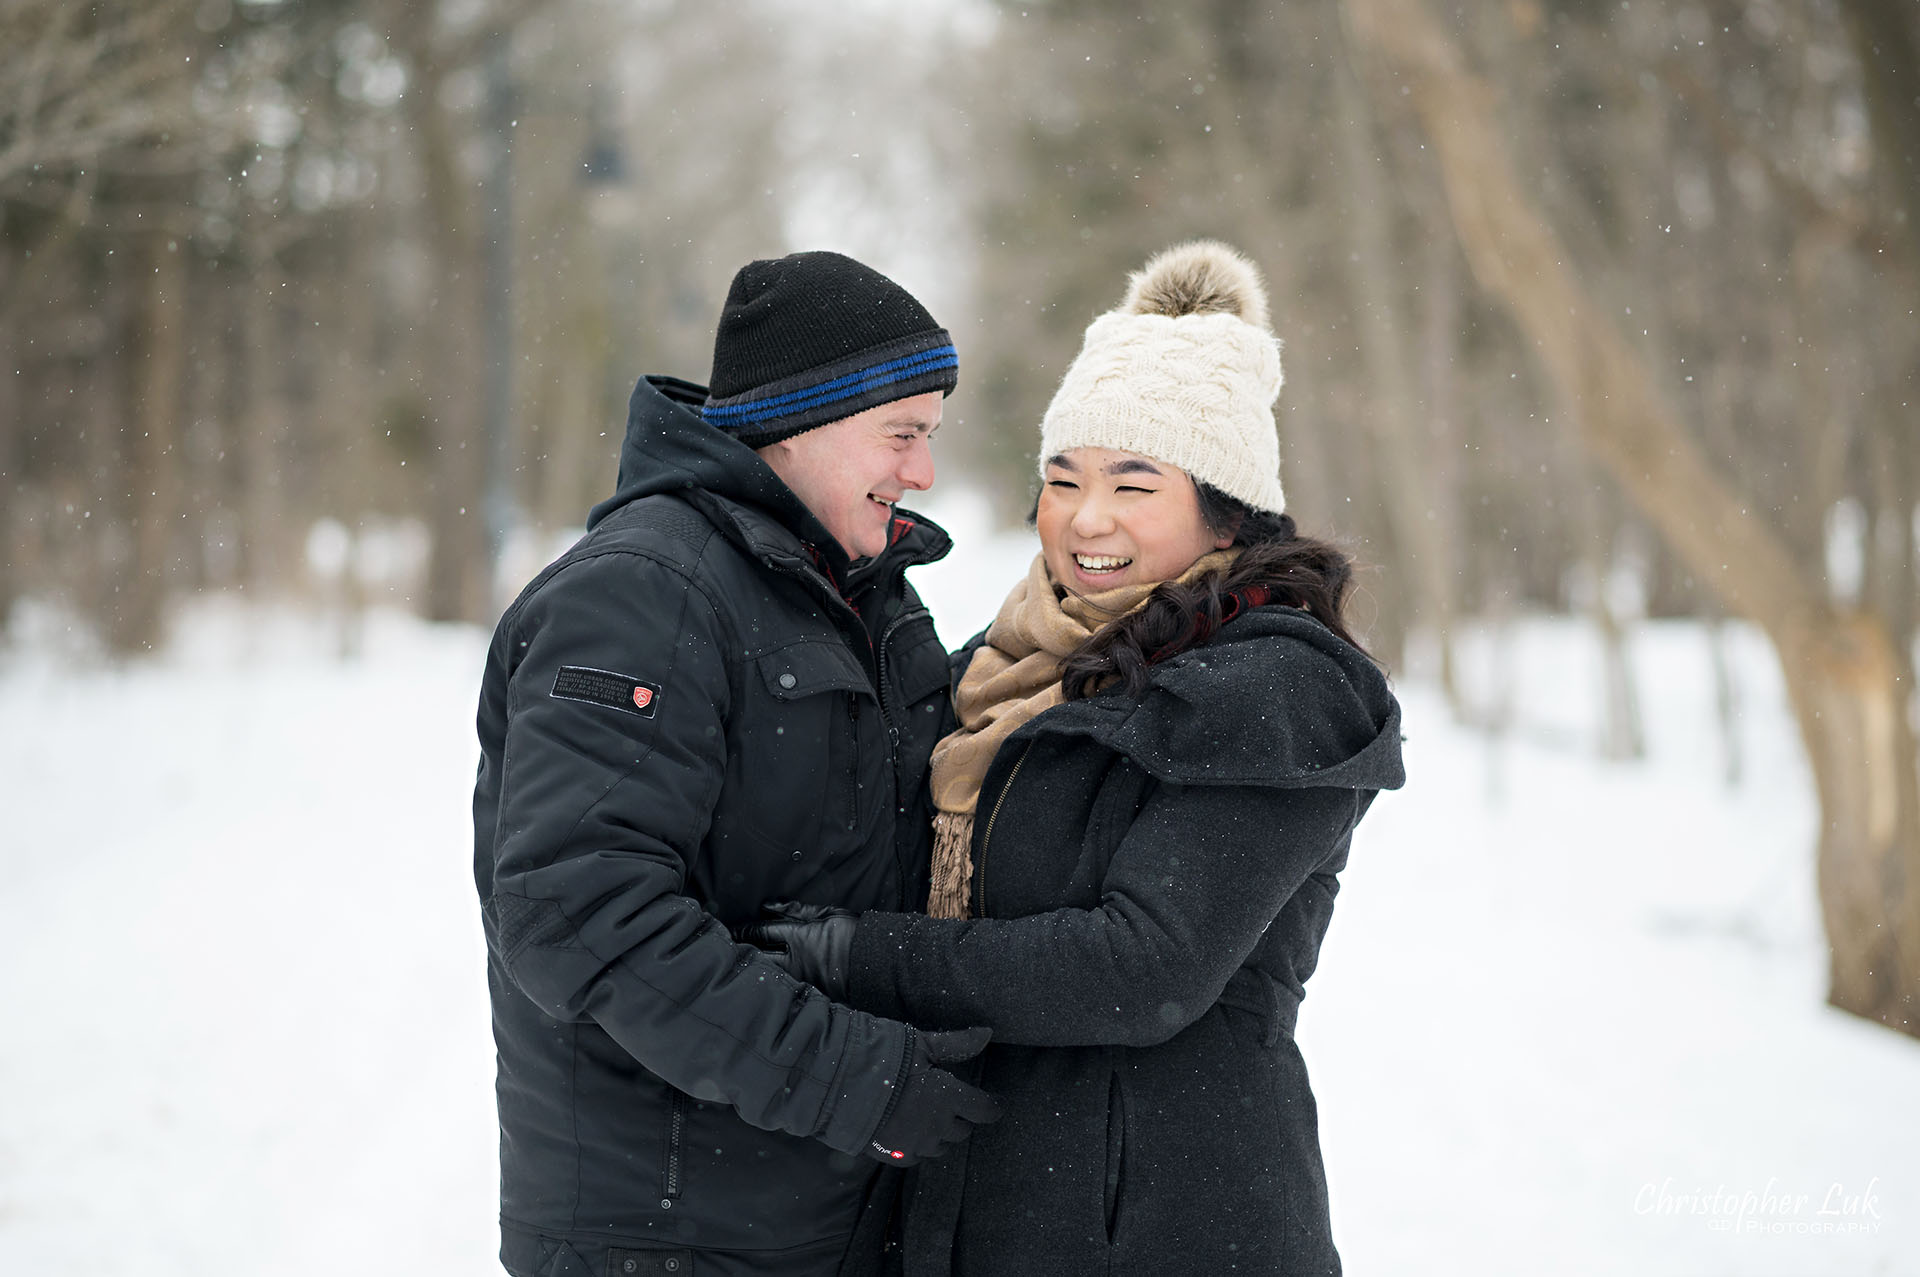 Christopher Luk Toronto Wedding Photographer Ice Skating Trail Winter Engagement Session Natural Photojournalistic Candid Bride Groom Portrait Colonel Samuel Smith Park Double Tree Lined Walking Path Pathway Walkway Landscape Funny Laughing